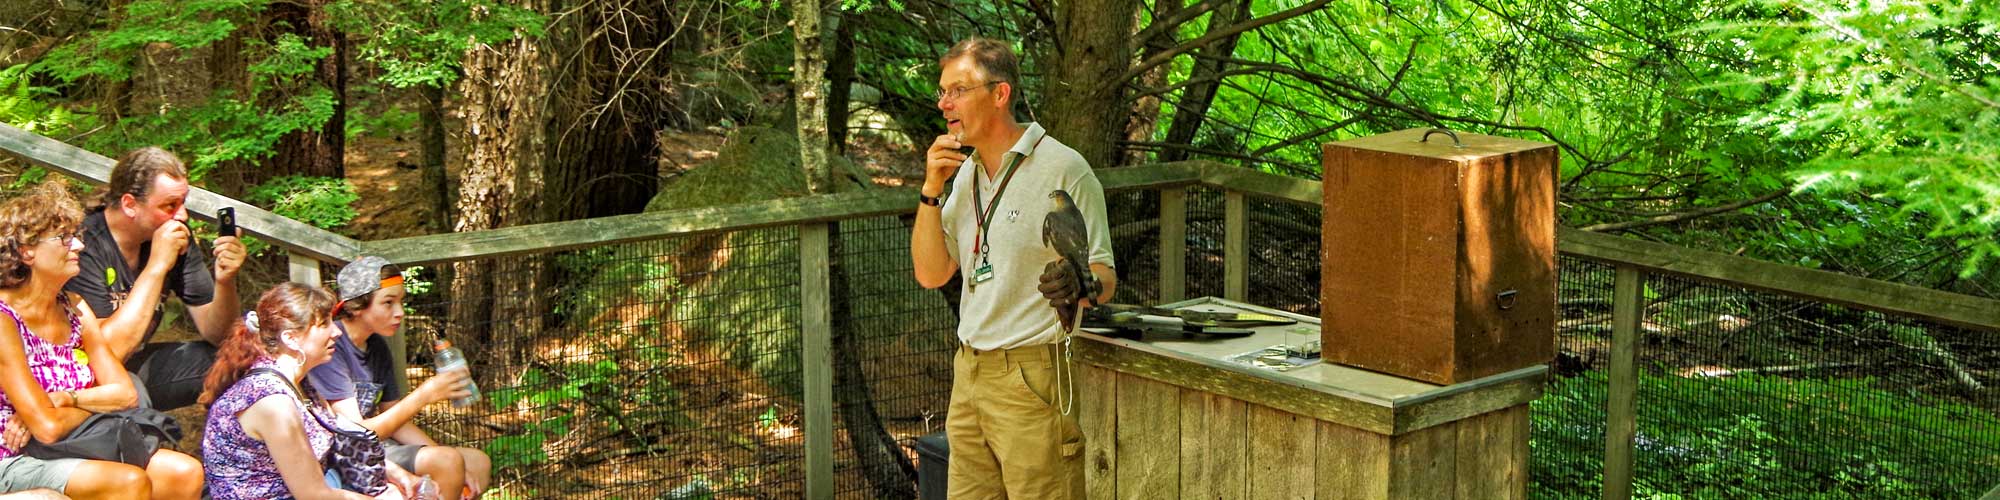 Naturalist presenting live animal program with Sharp-shinned Hawk to visitors.